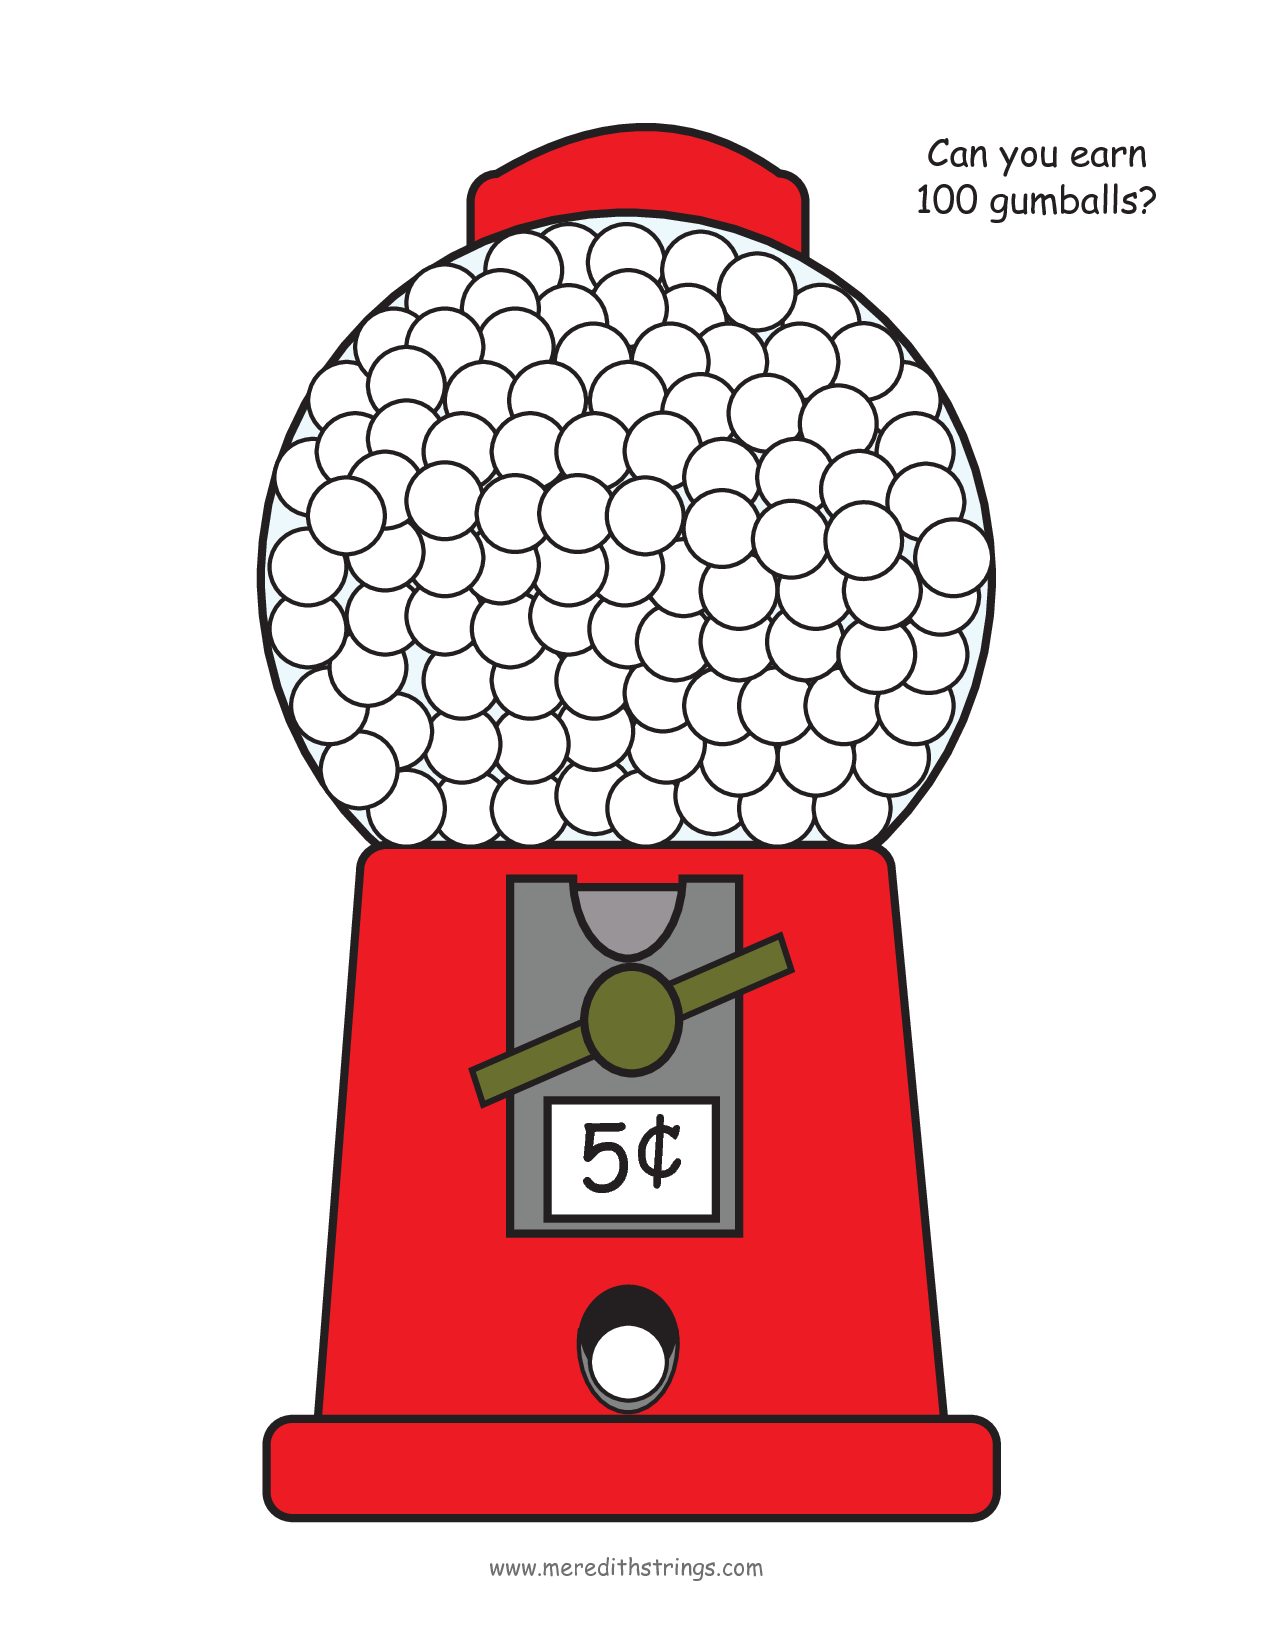 free-gumball-machine-cliparts-download-free-gumball-machine-cliparts